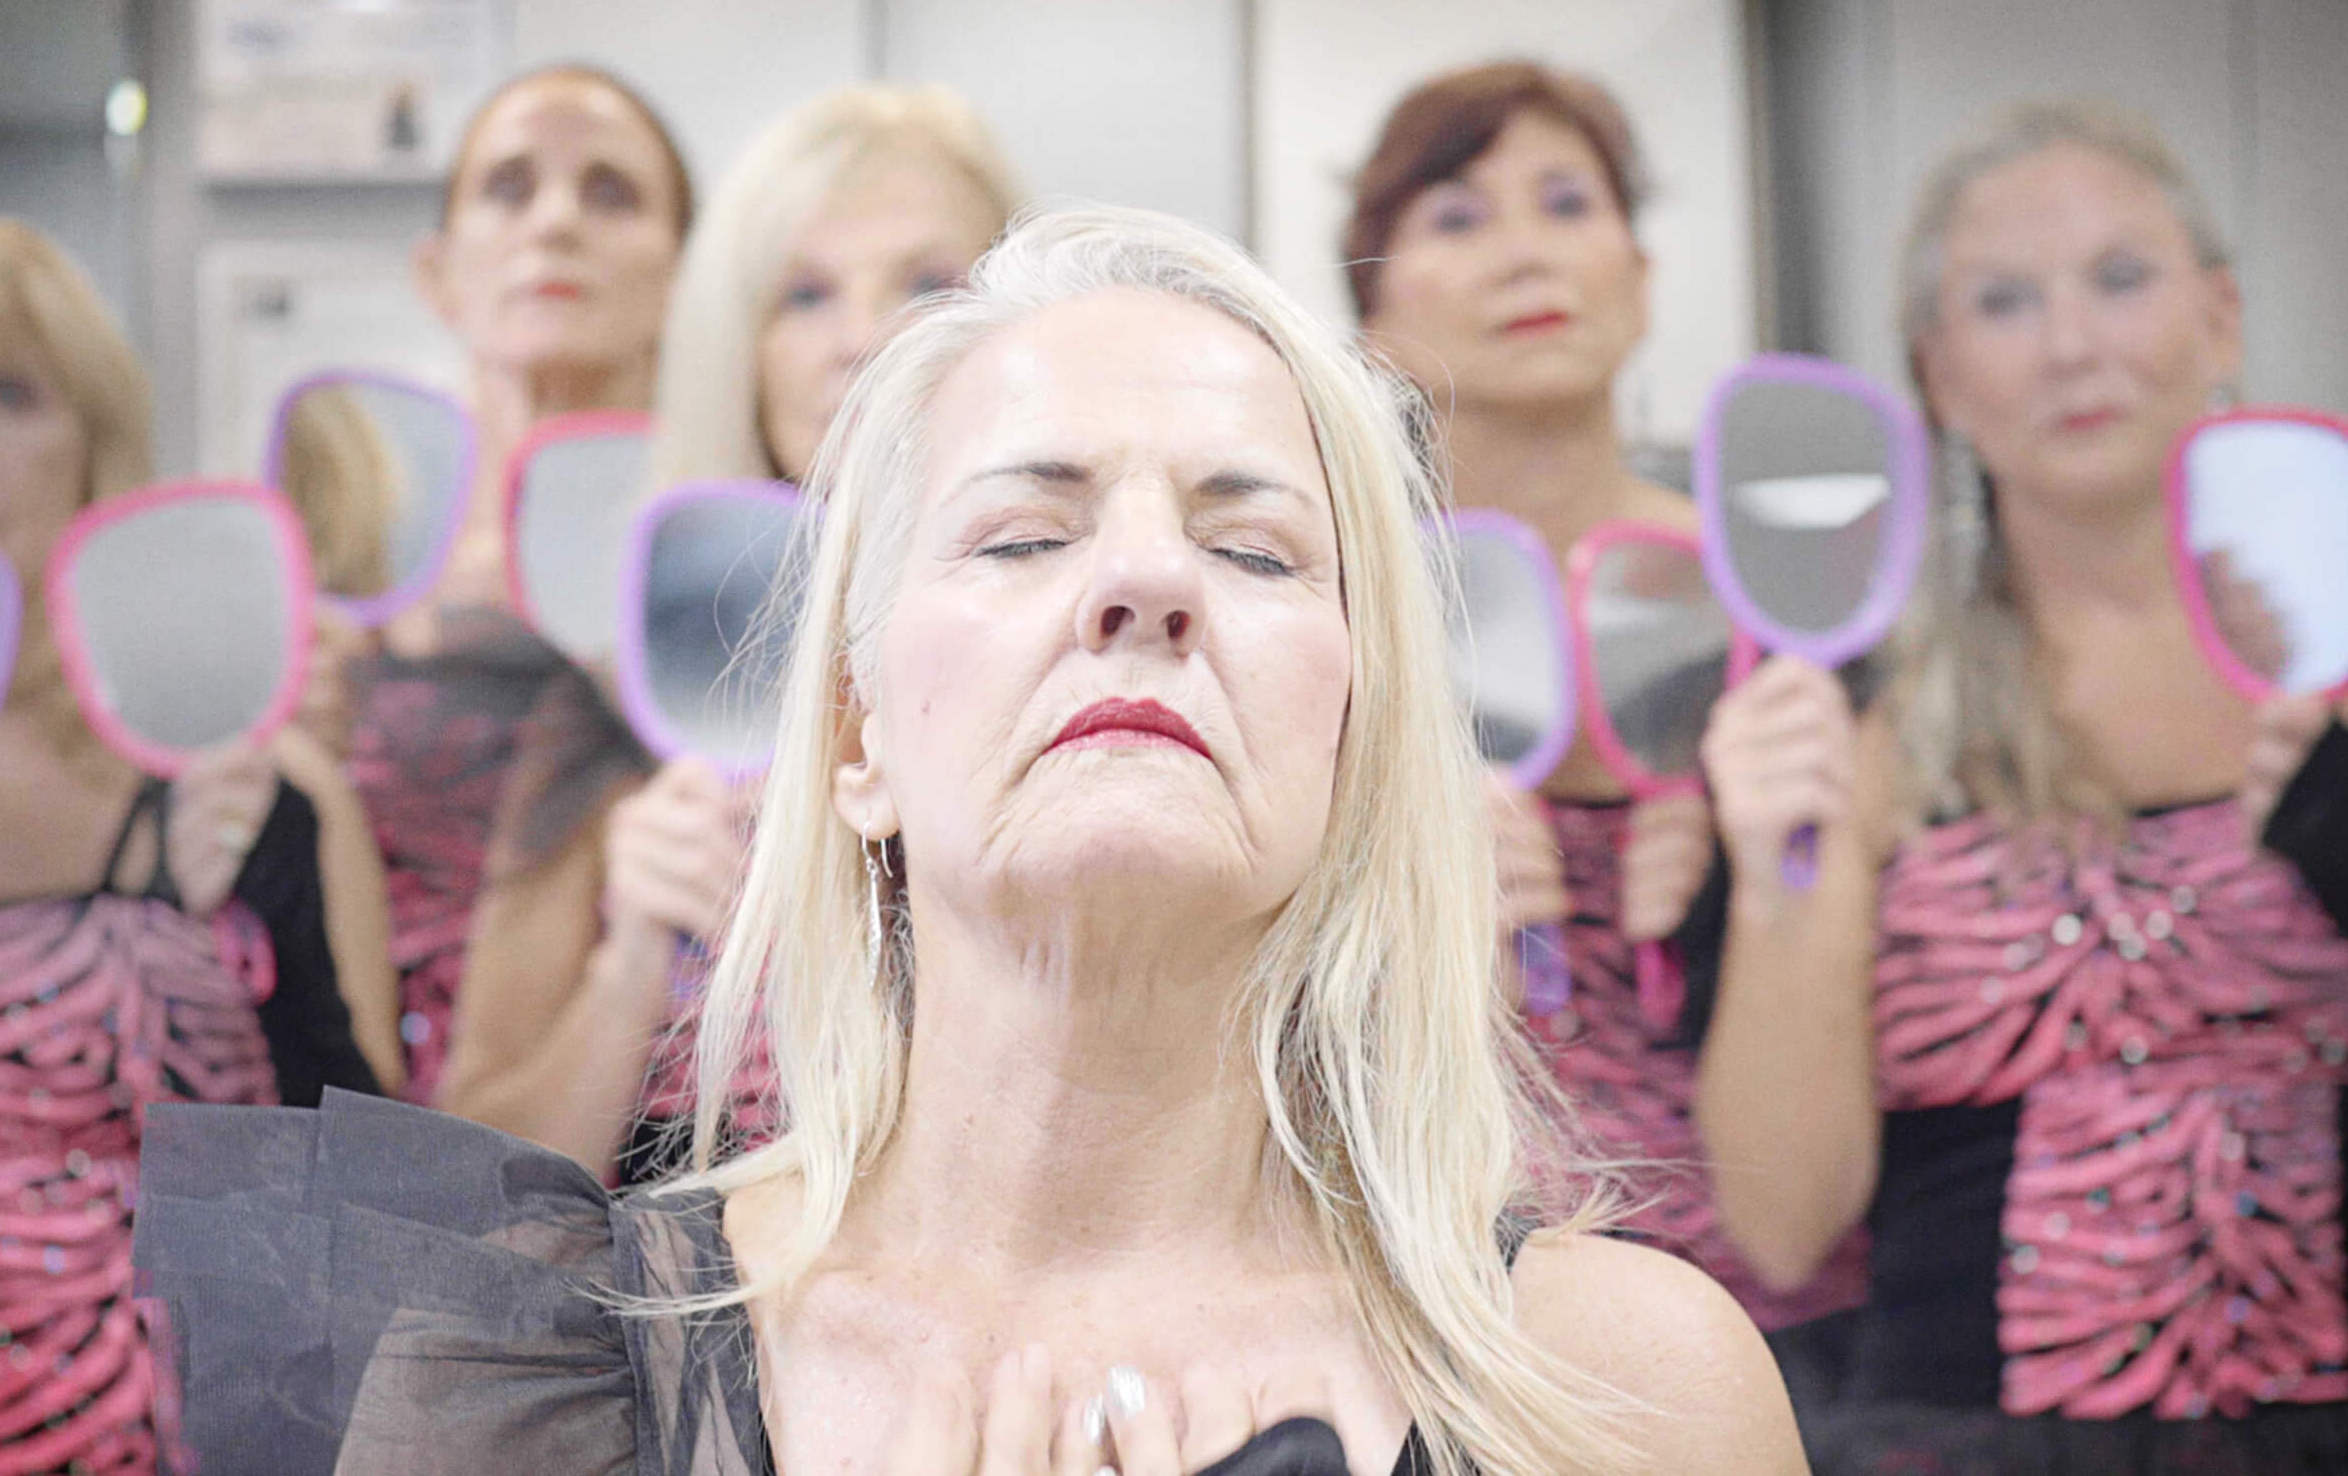 Beauty shop throw down: Calendar Girls pull out all the stops / Photo: Love Martinsen